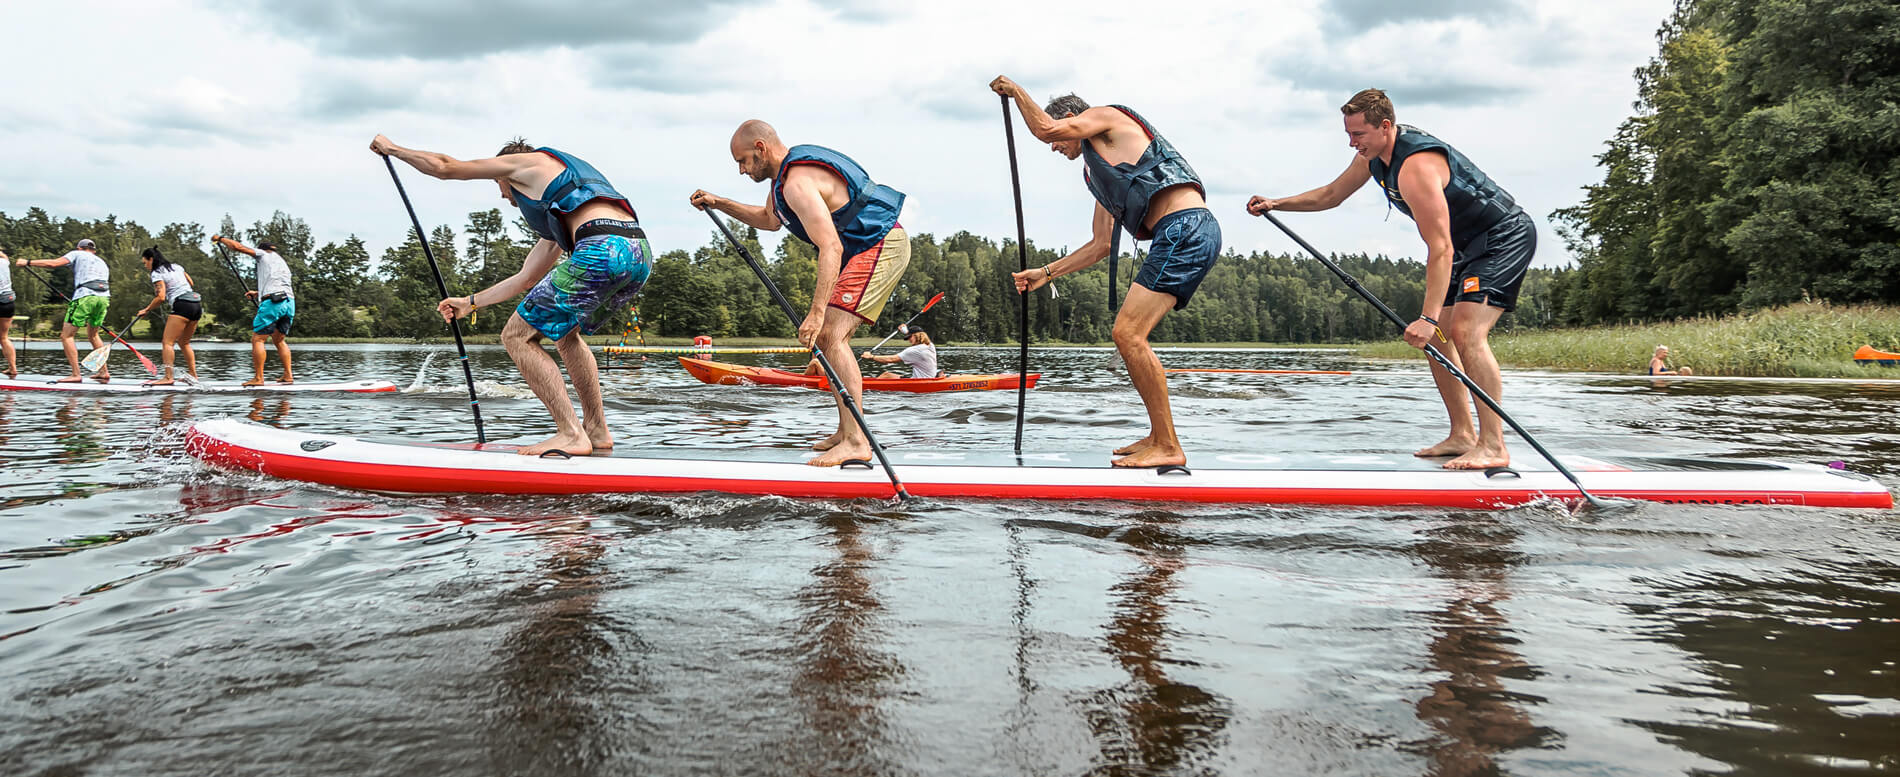 SUP racing on a river